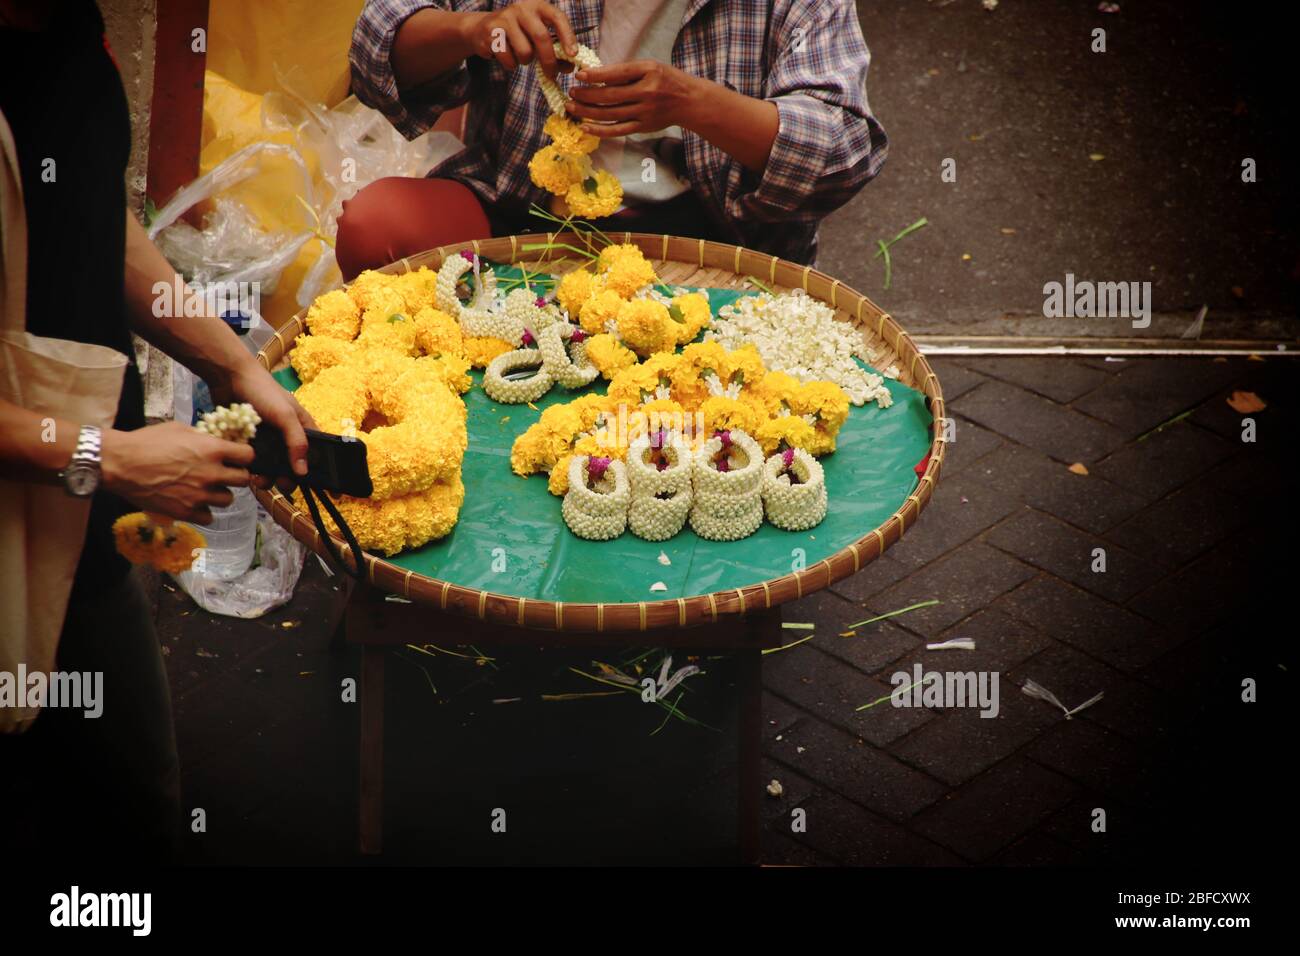 Thai street vendor selling Phuang malai or malai, which is a flower garland used for buddhist offerings and charms for good luck in the Thai culture a Stock Photo